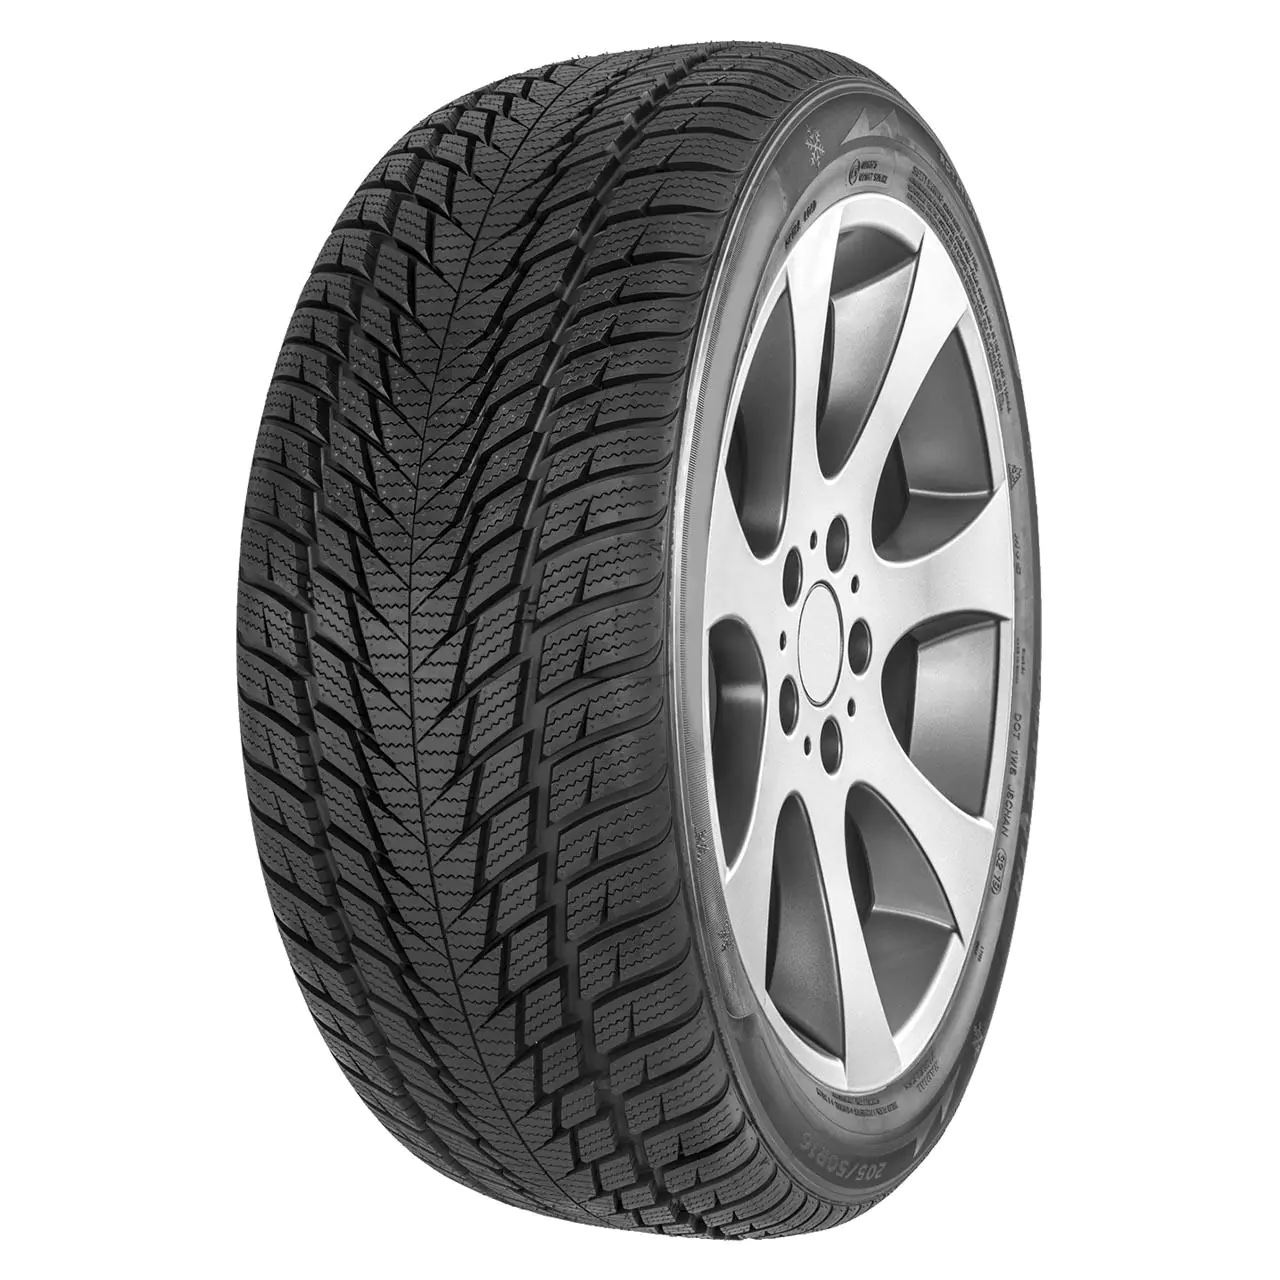 Gomme 4x4 Suv Fortuna 295/35 R21 107V GOWIN UHP3 XL M+S Invernale